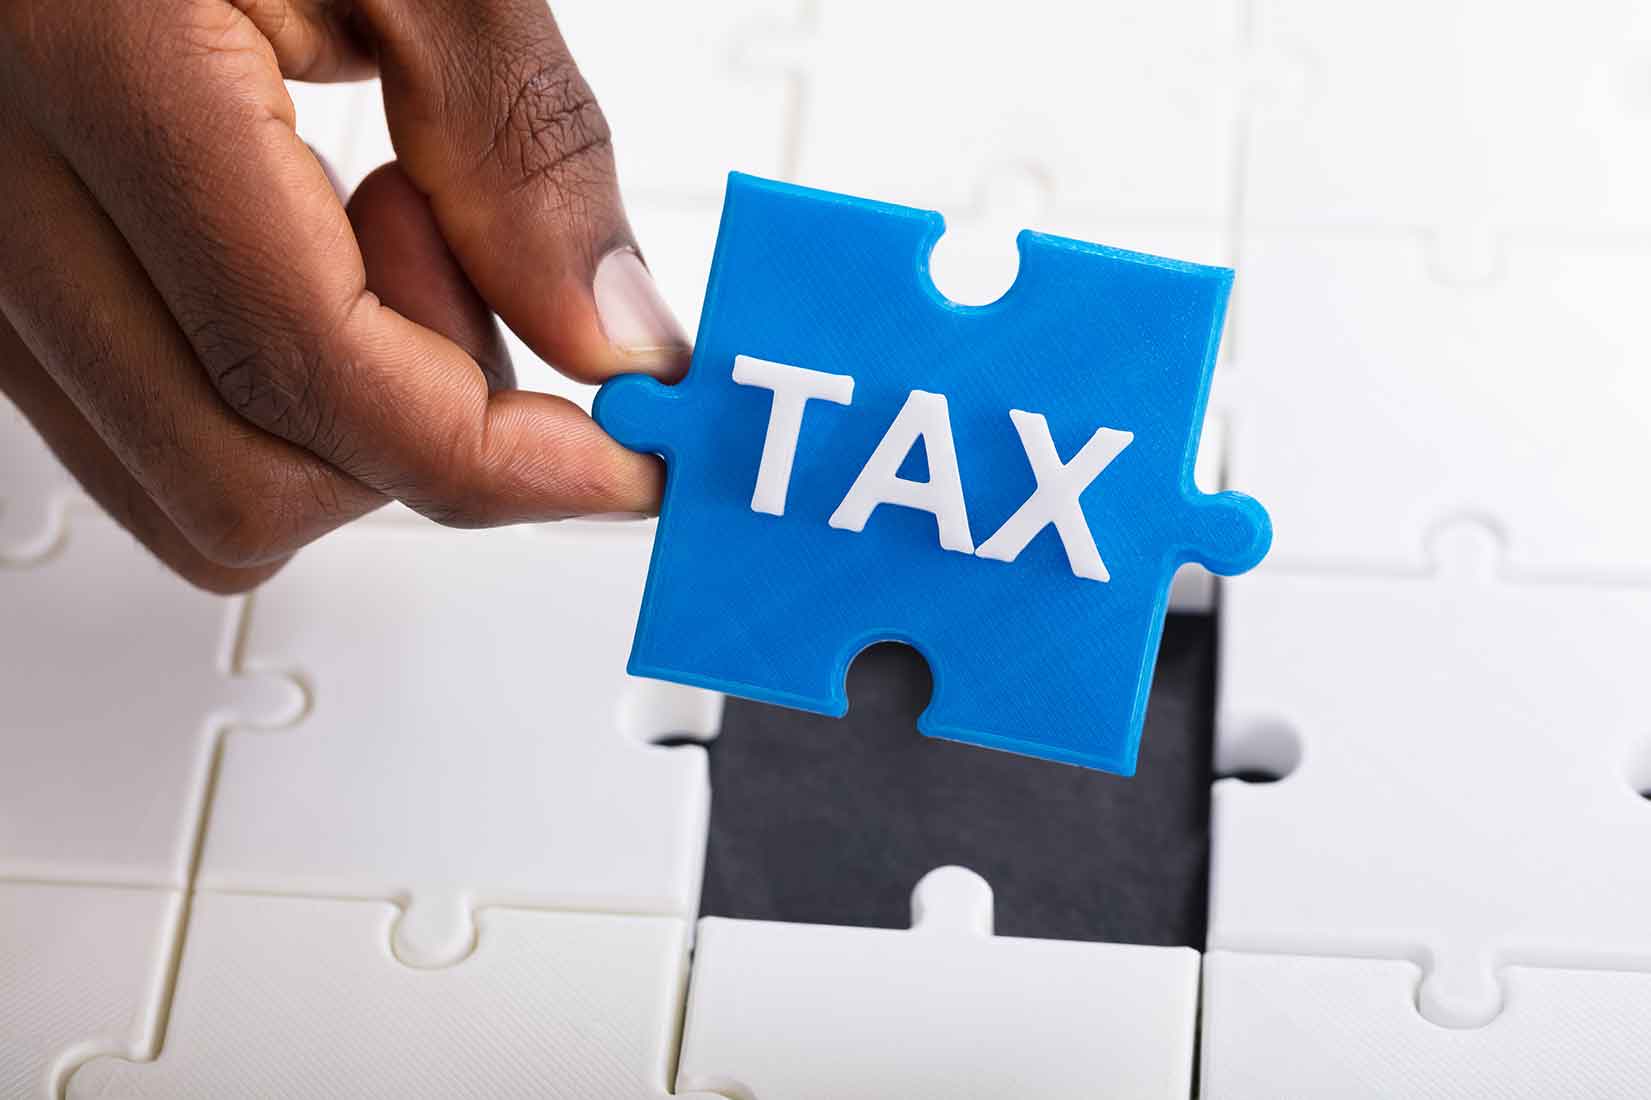 5 Implications of VAT collection by states in Nigeria